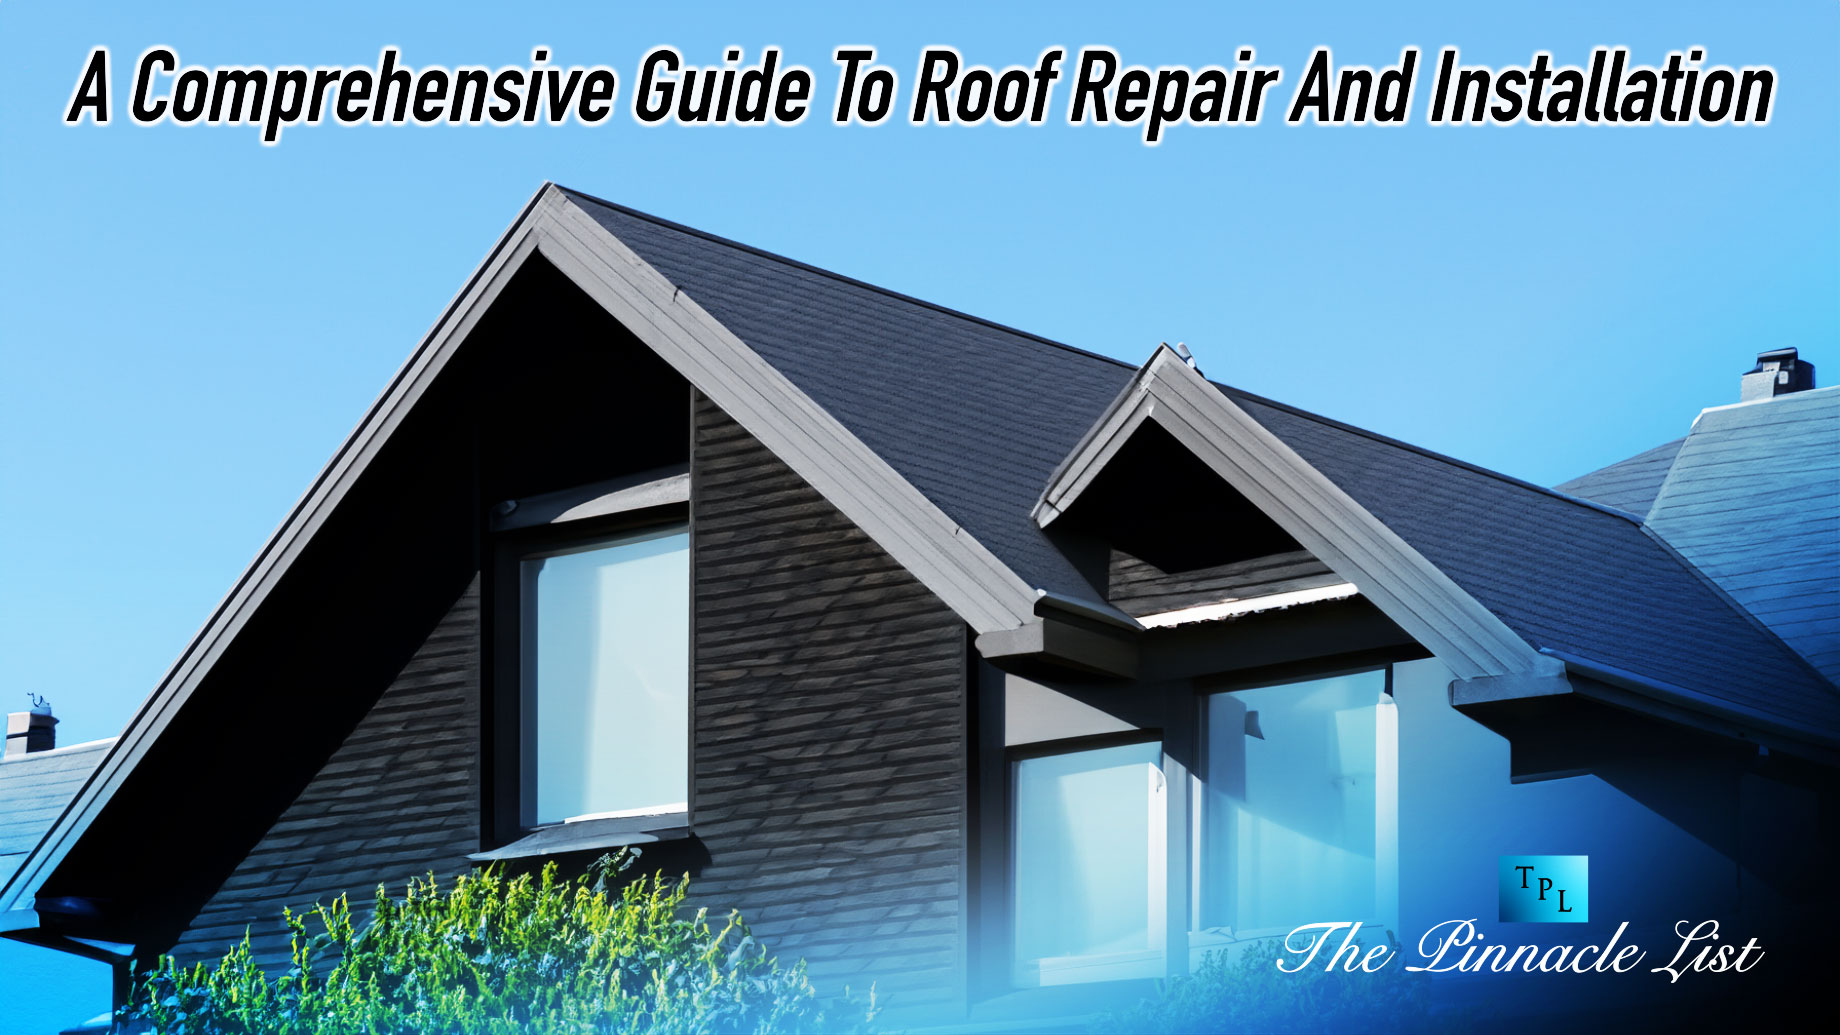 A Comprehensive Guide To Roof Repair And Installation